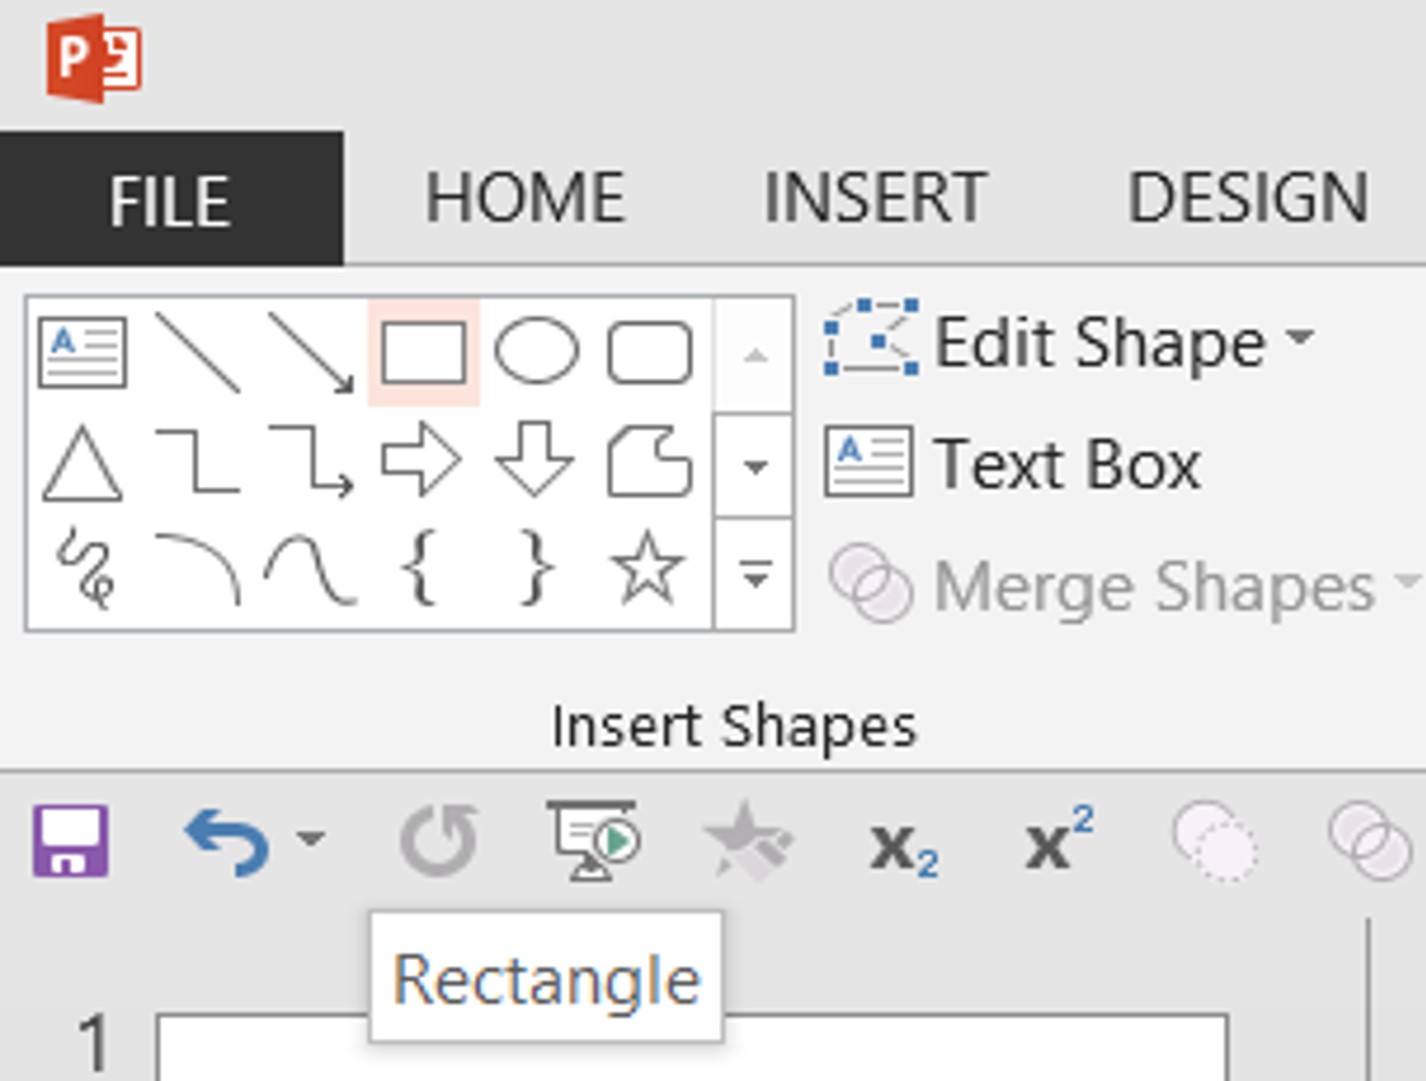 Step Two: Find the Rectangle Drawing Tool in the Drawing Group under the Home Tab or in the Illustrations Group under the Insert Tab. 